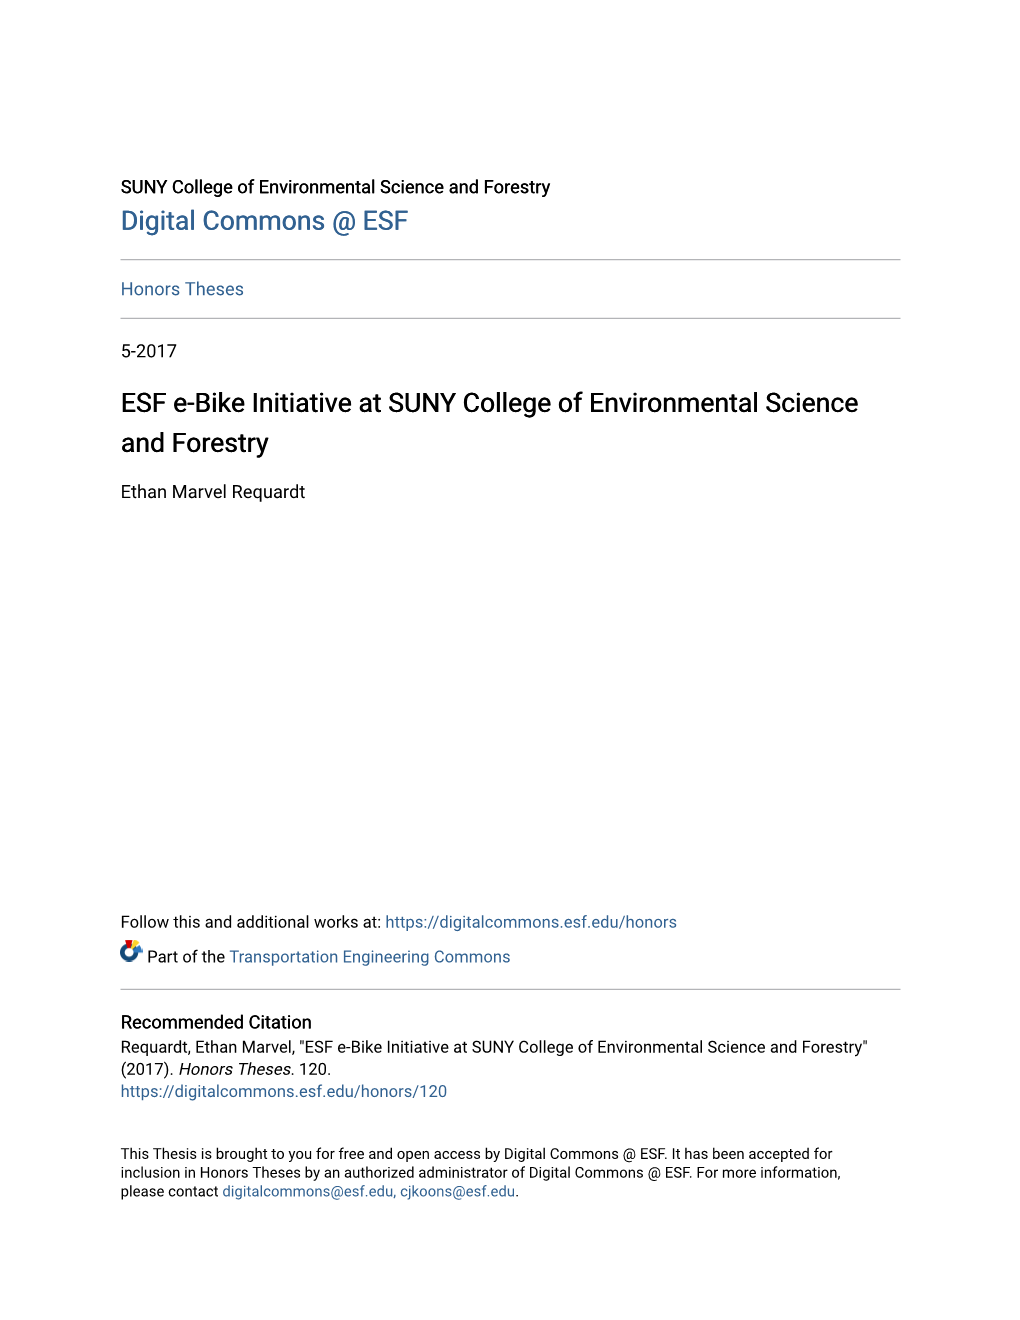 ESF E-Bike Initiative at SUNY College of Environmental Science and Forestry